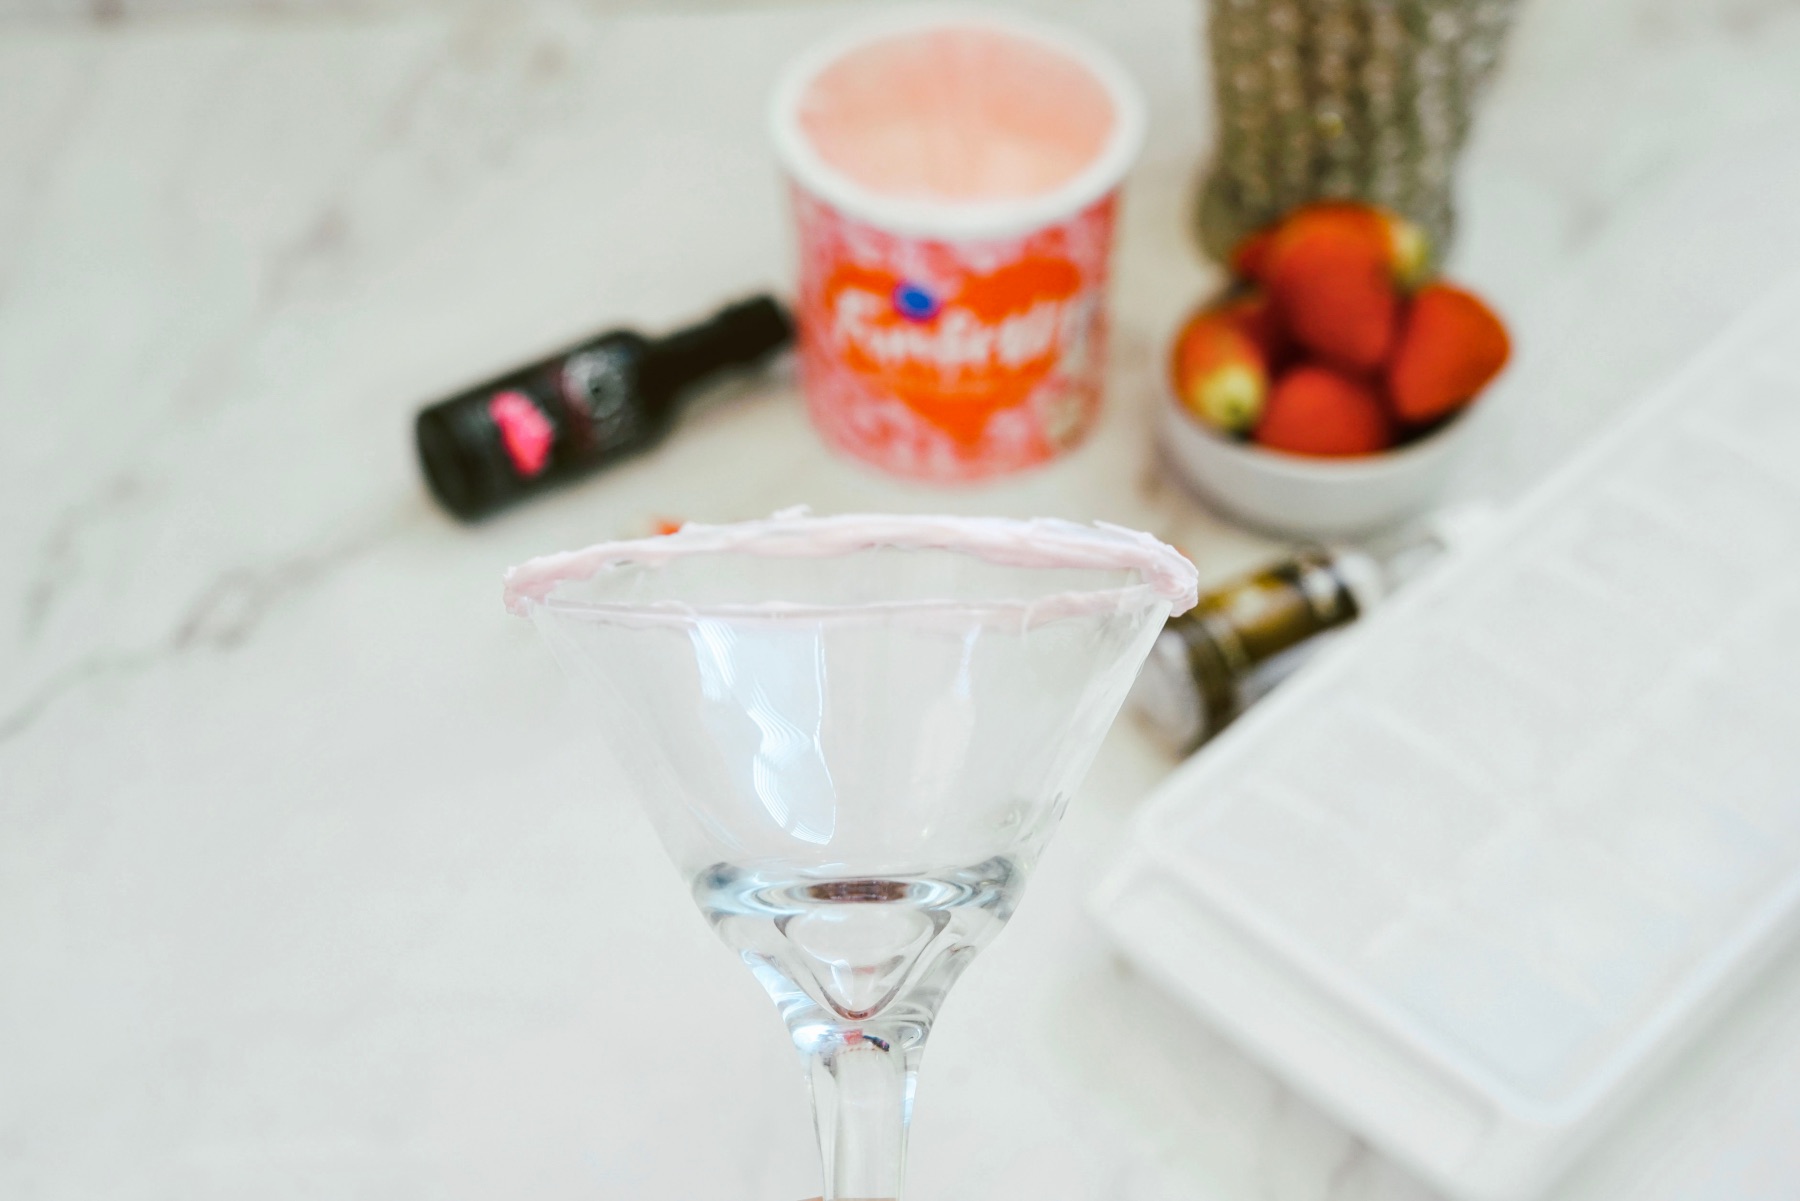 paint the glass rim with strawberry frosting